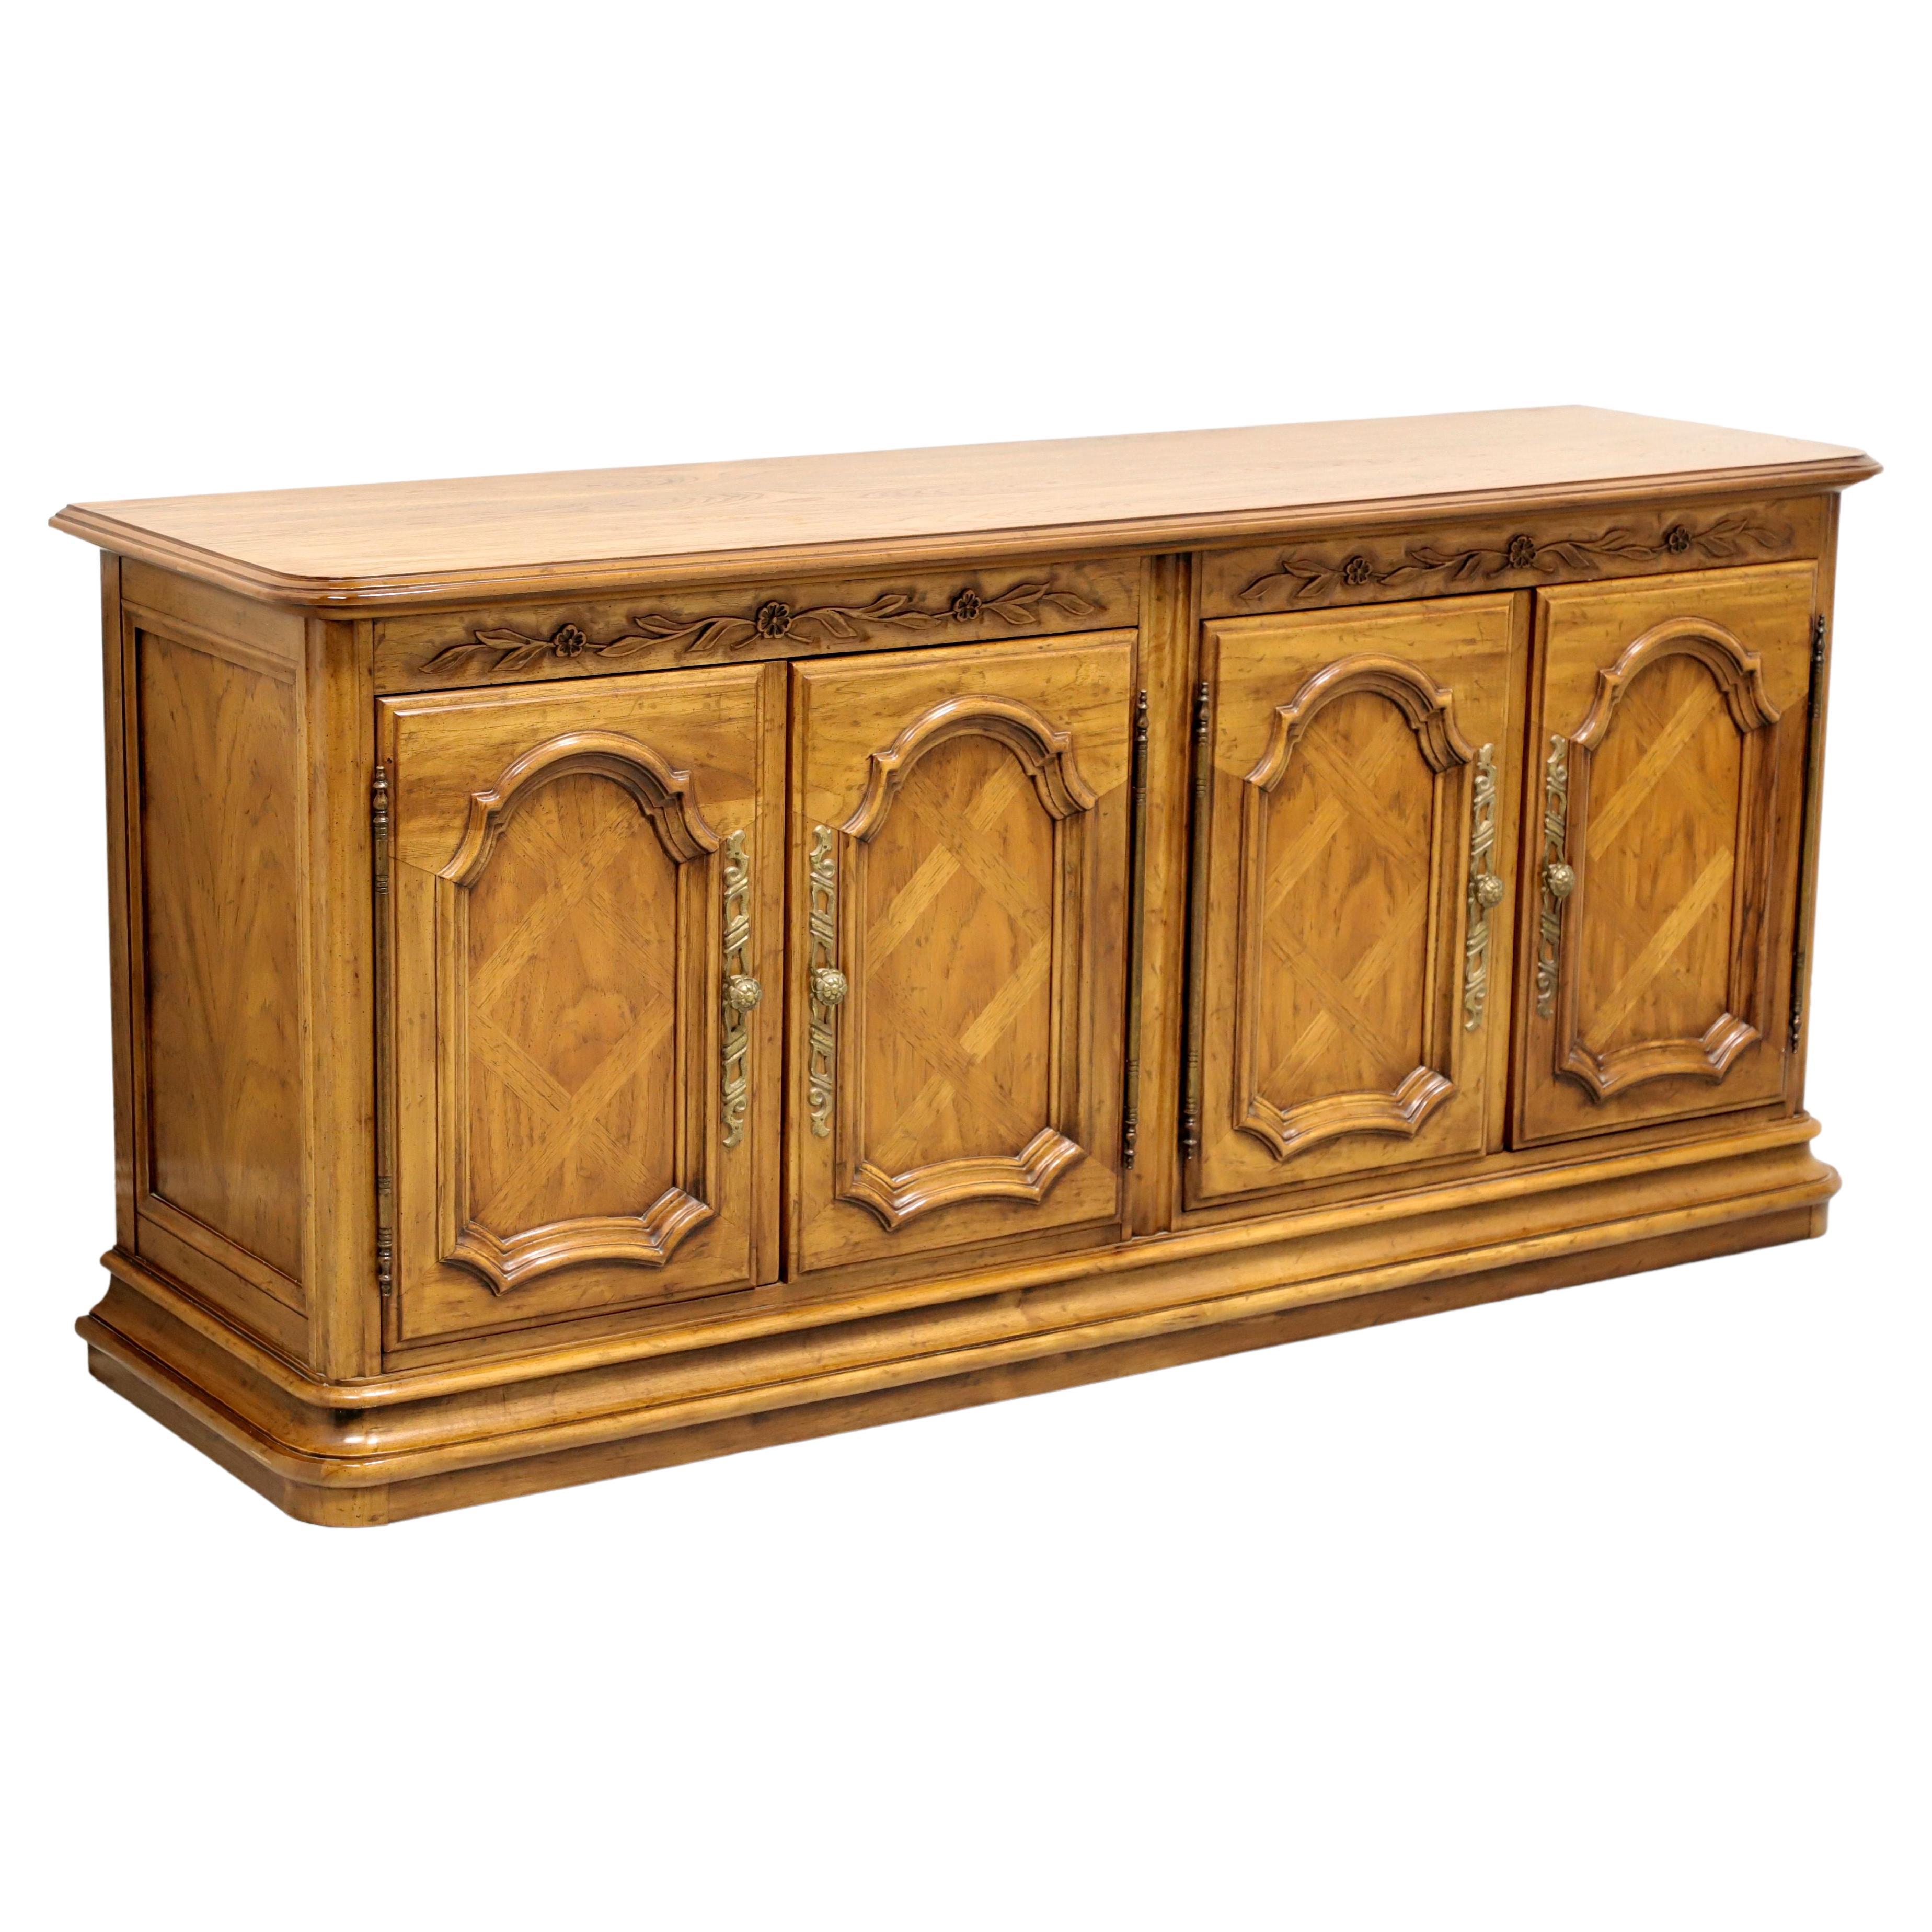 DREXEL Cabernet French Country Style Sideboard / Credenza